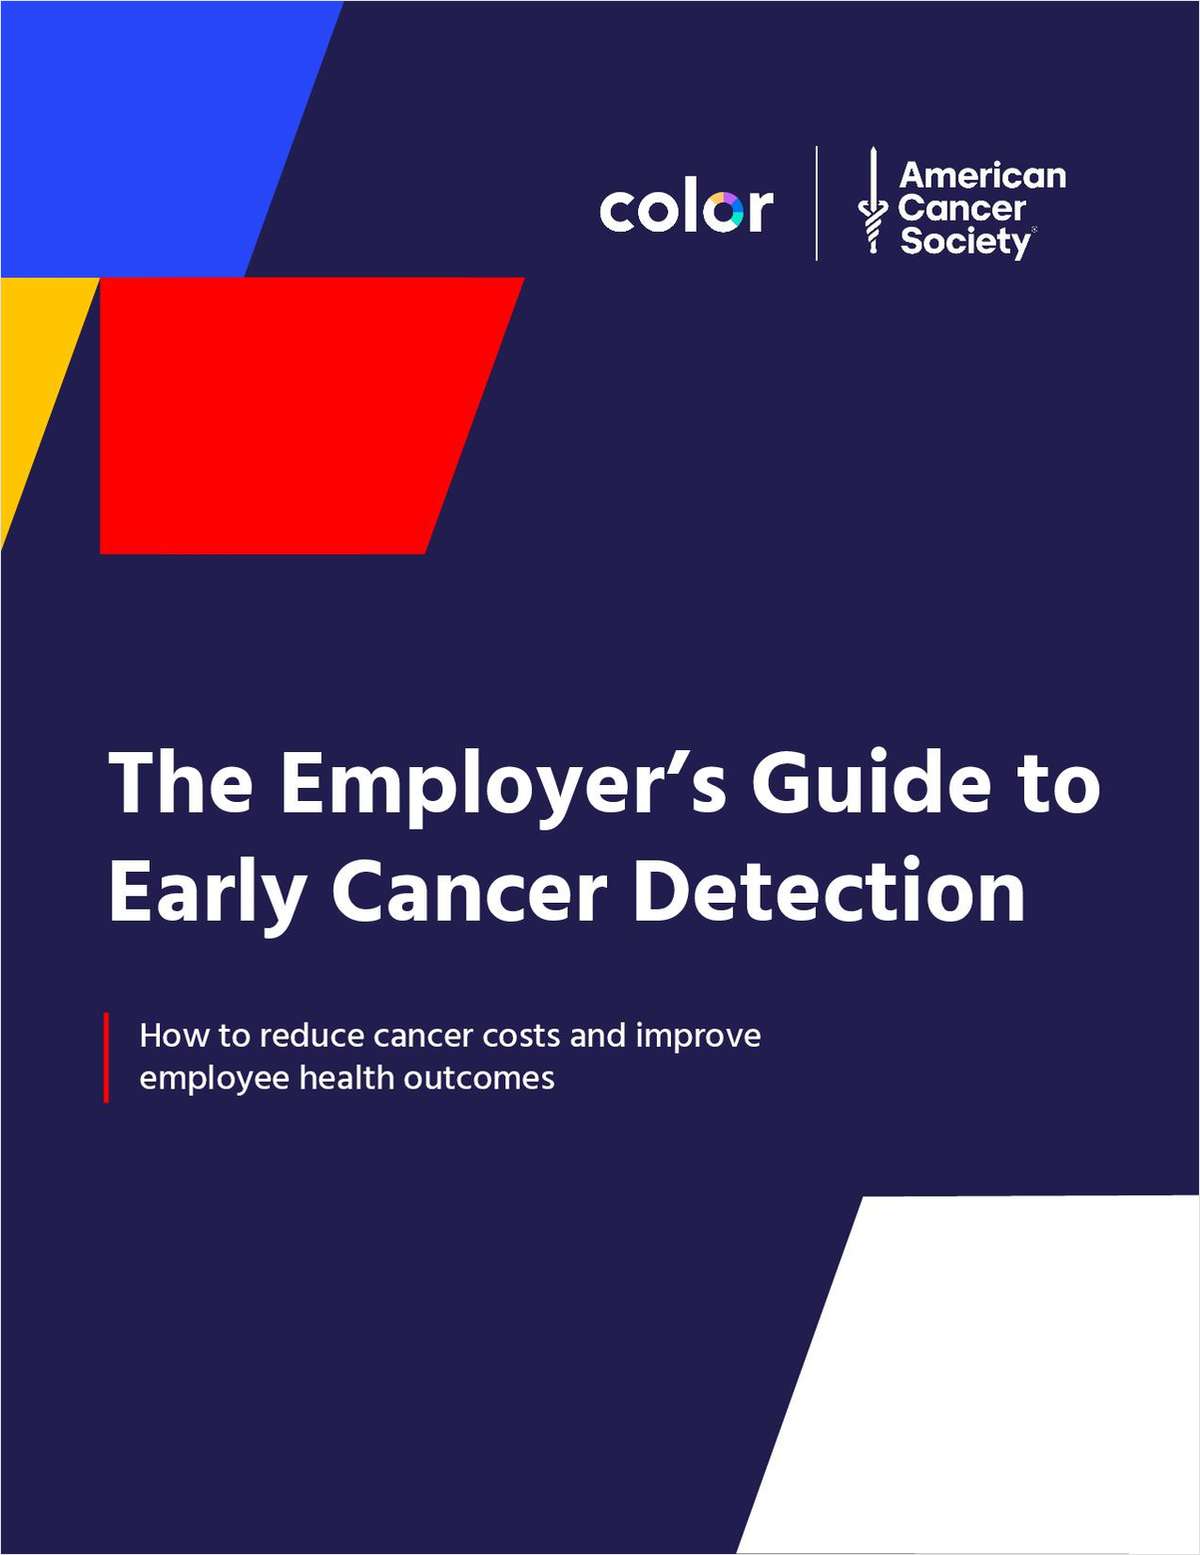 Client Guide: How Employers Can Reduce Cancer Costs and Improve Employee Health Outcomes